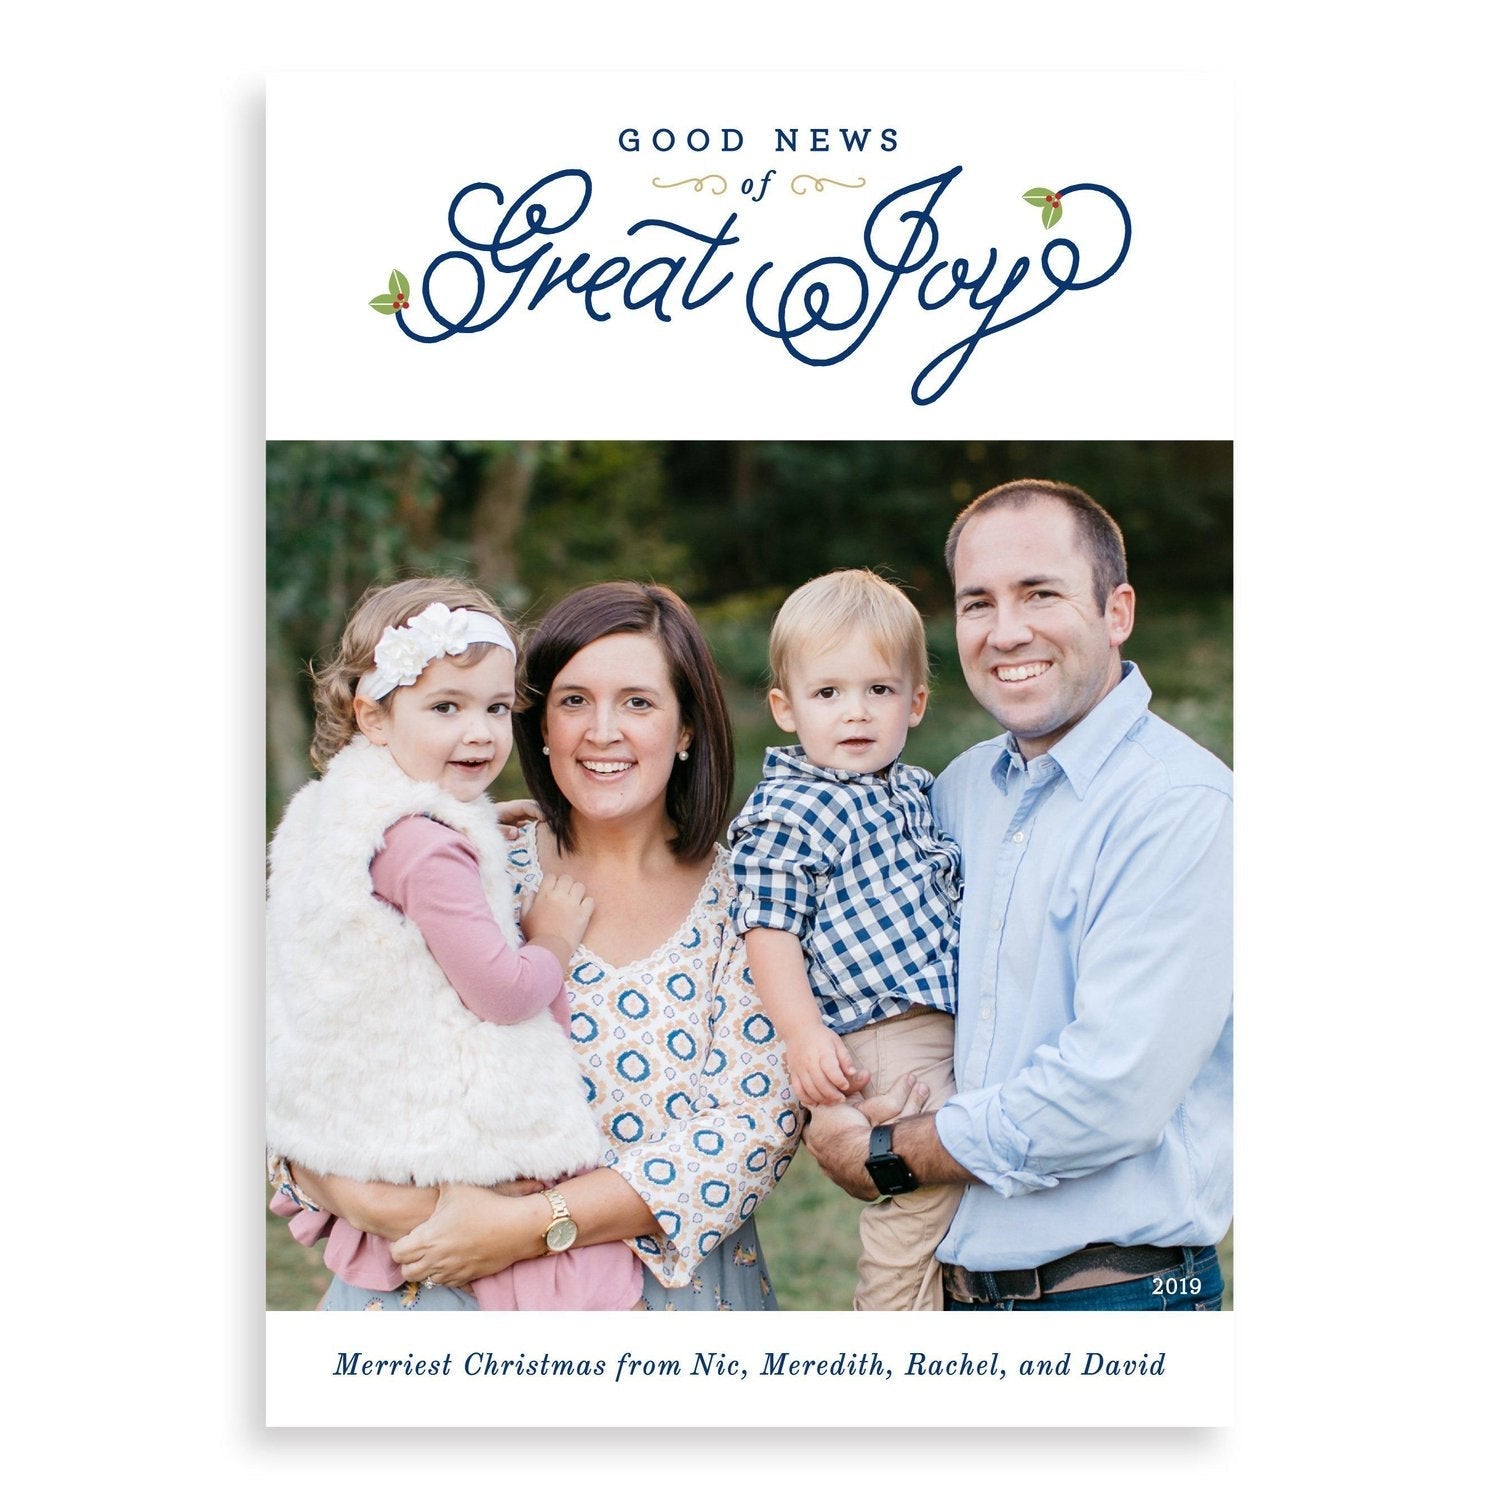 Good News of Great Joy | Christian Christmas Cards from Muscadine Press